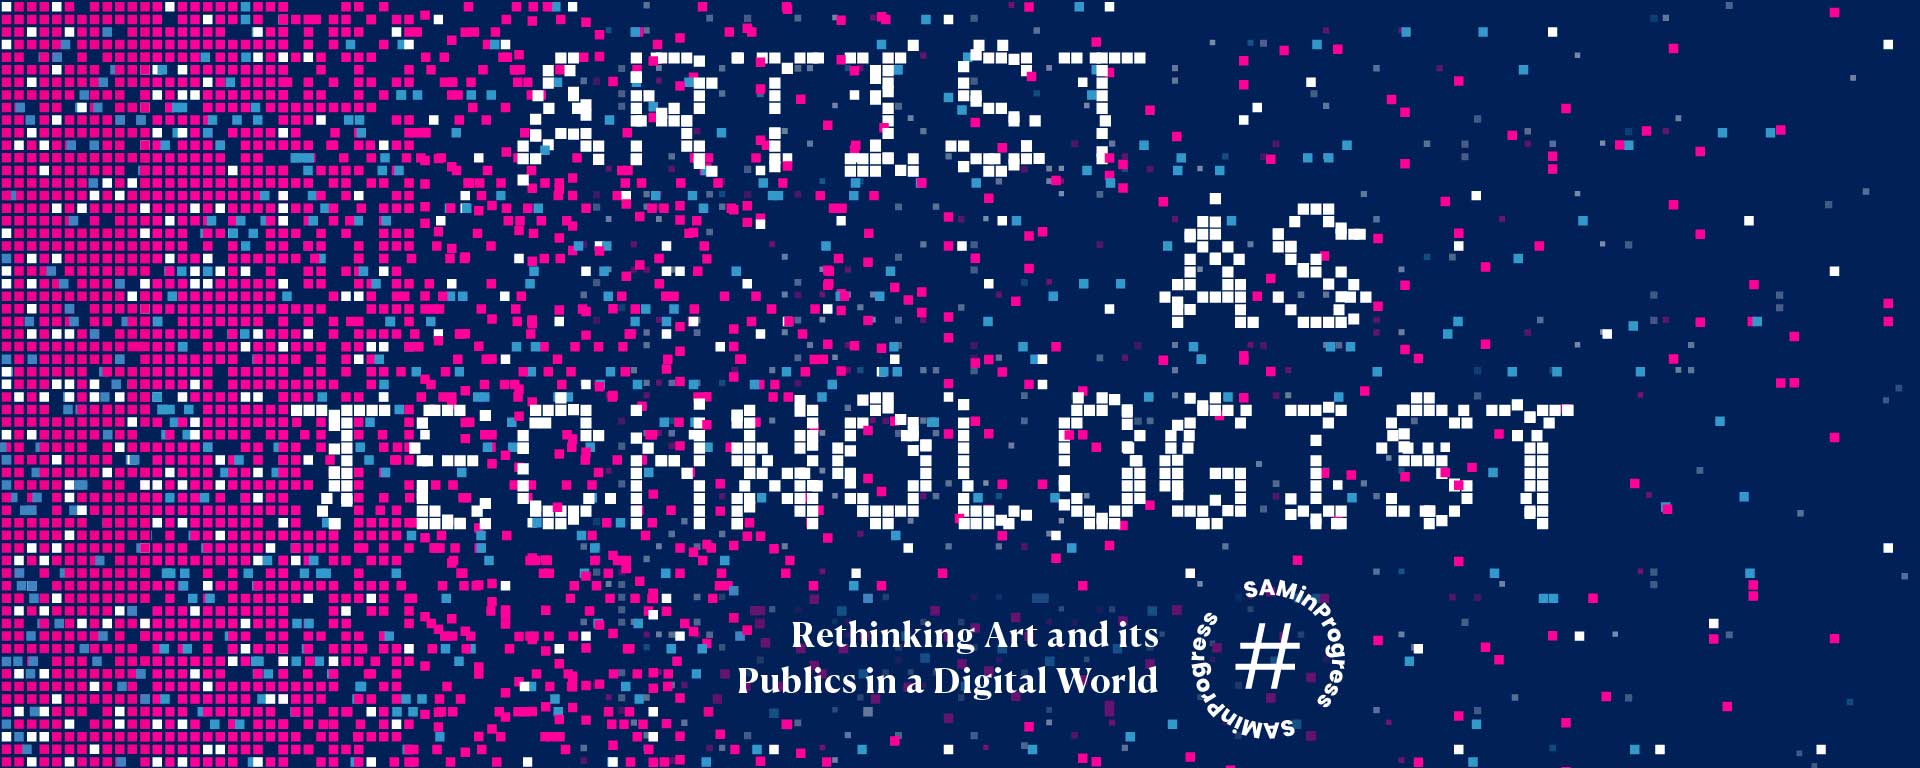 The Artist as Technologist: Rethinking Art and its Publics in a Digital World